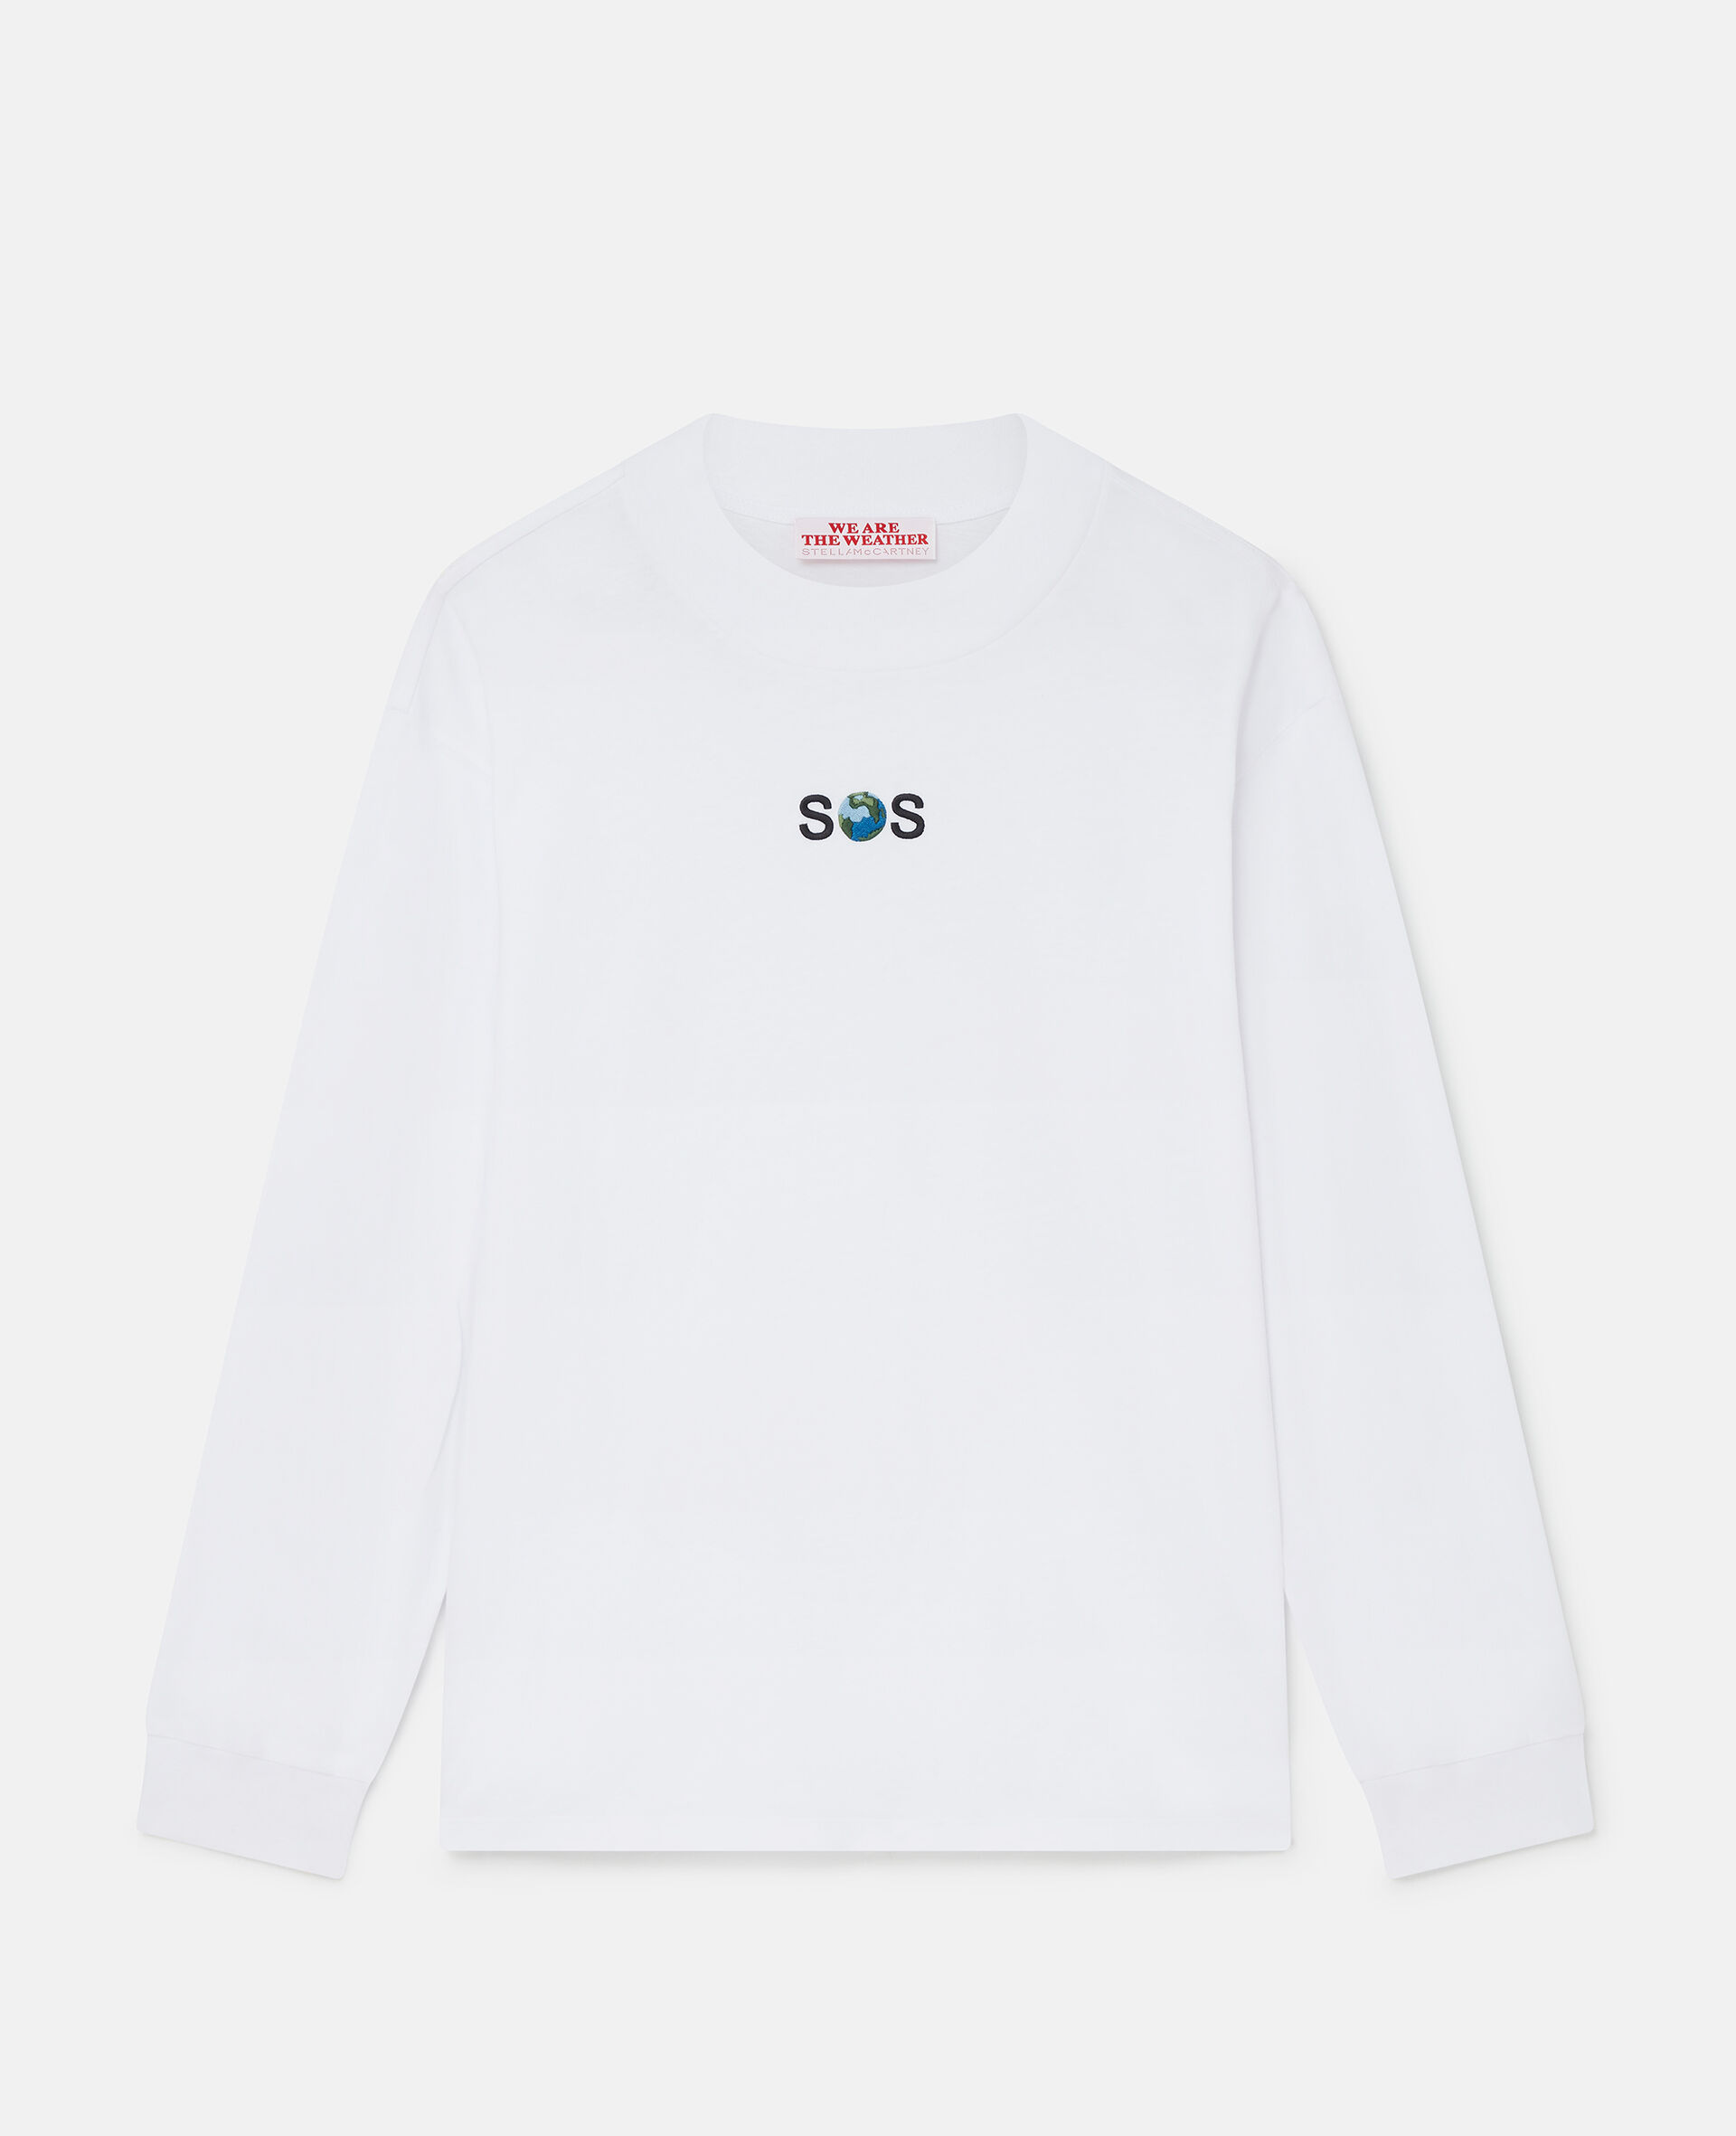 SOS Embroidered Long-Sleeve T-Shirt-White-large image number 0